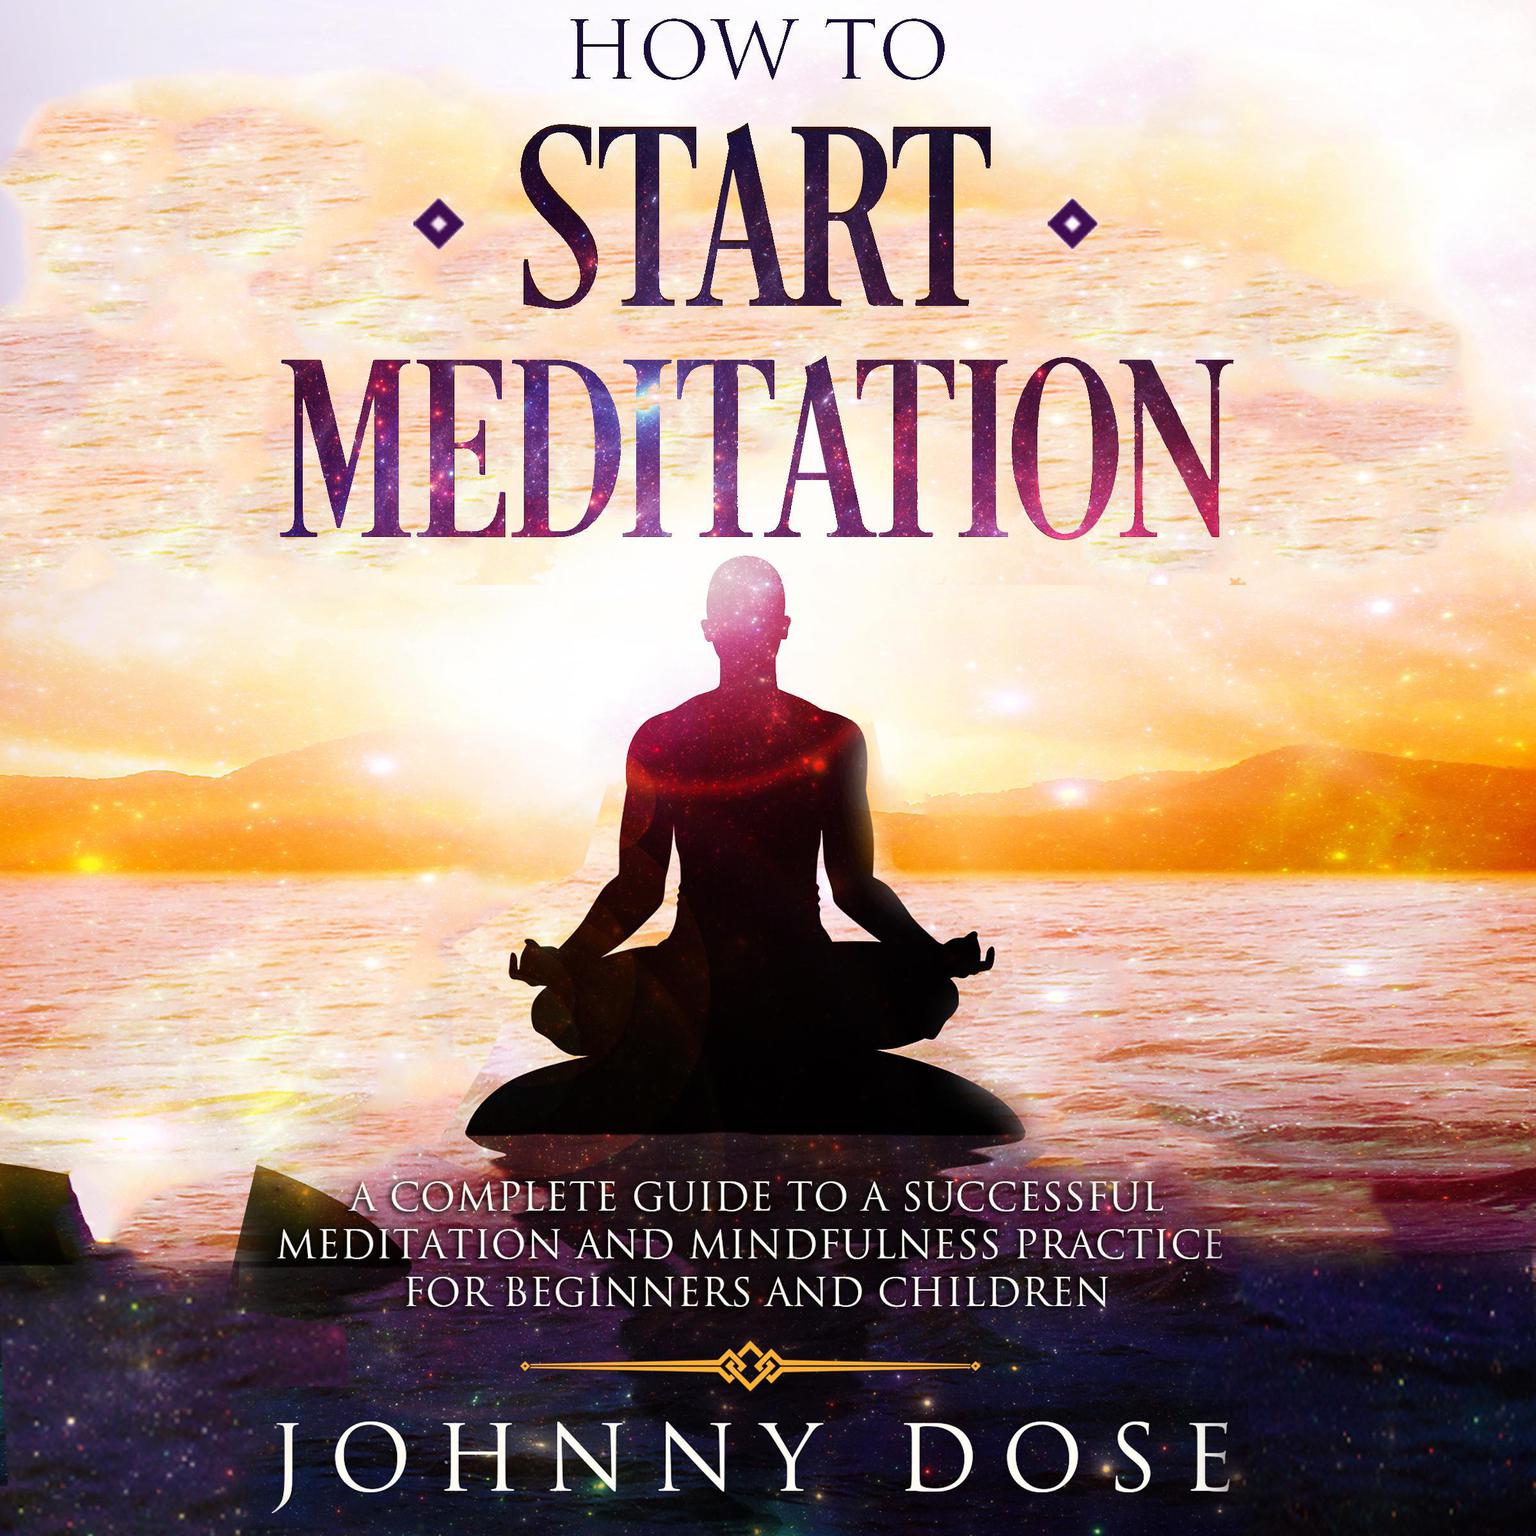 How to Start Meditation: A Complete Guide to a Successful Meditation and Mindfulness Practice for Beginners and Children Audiobook, by Johnny Dose